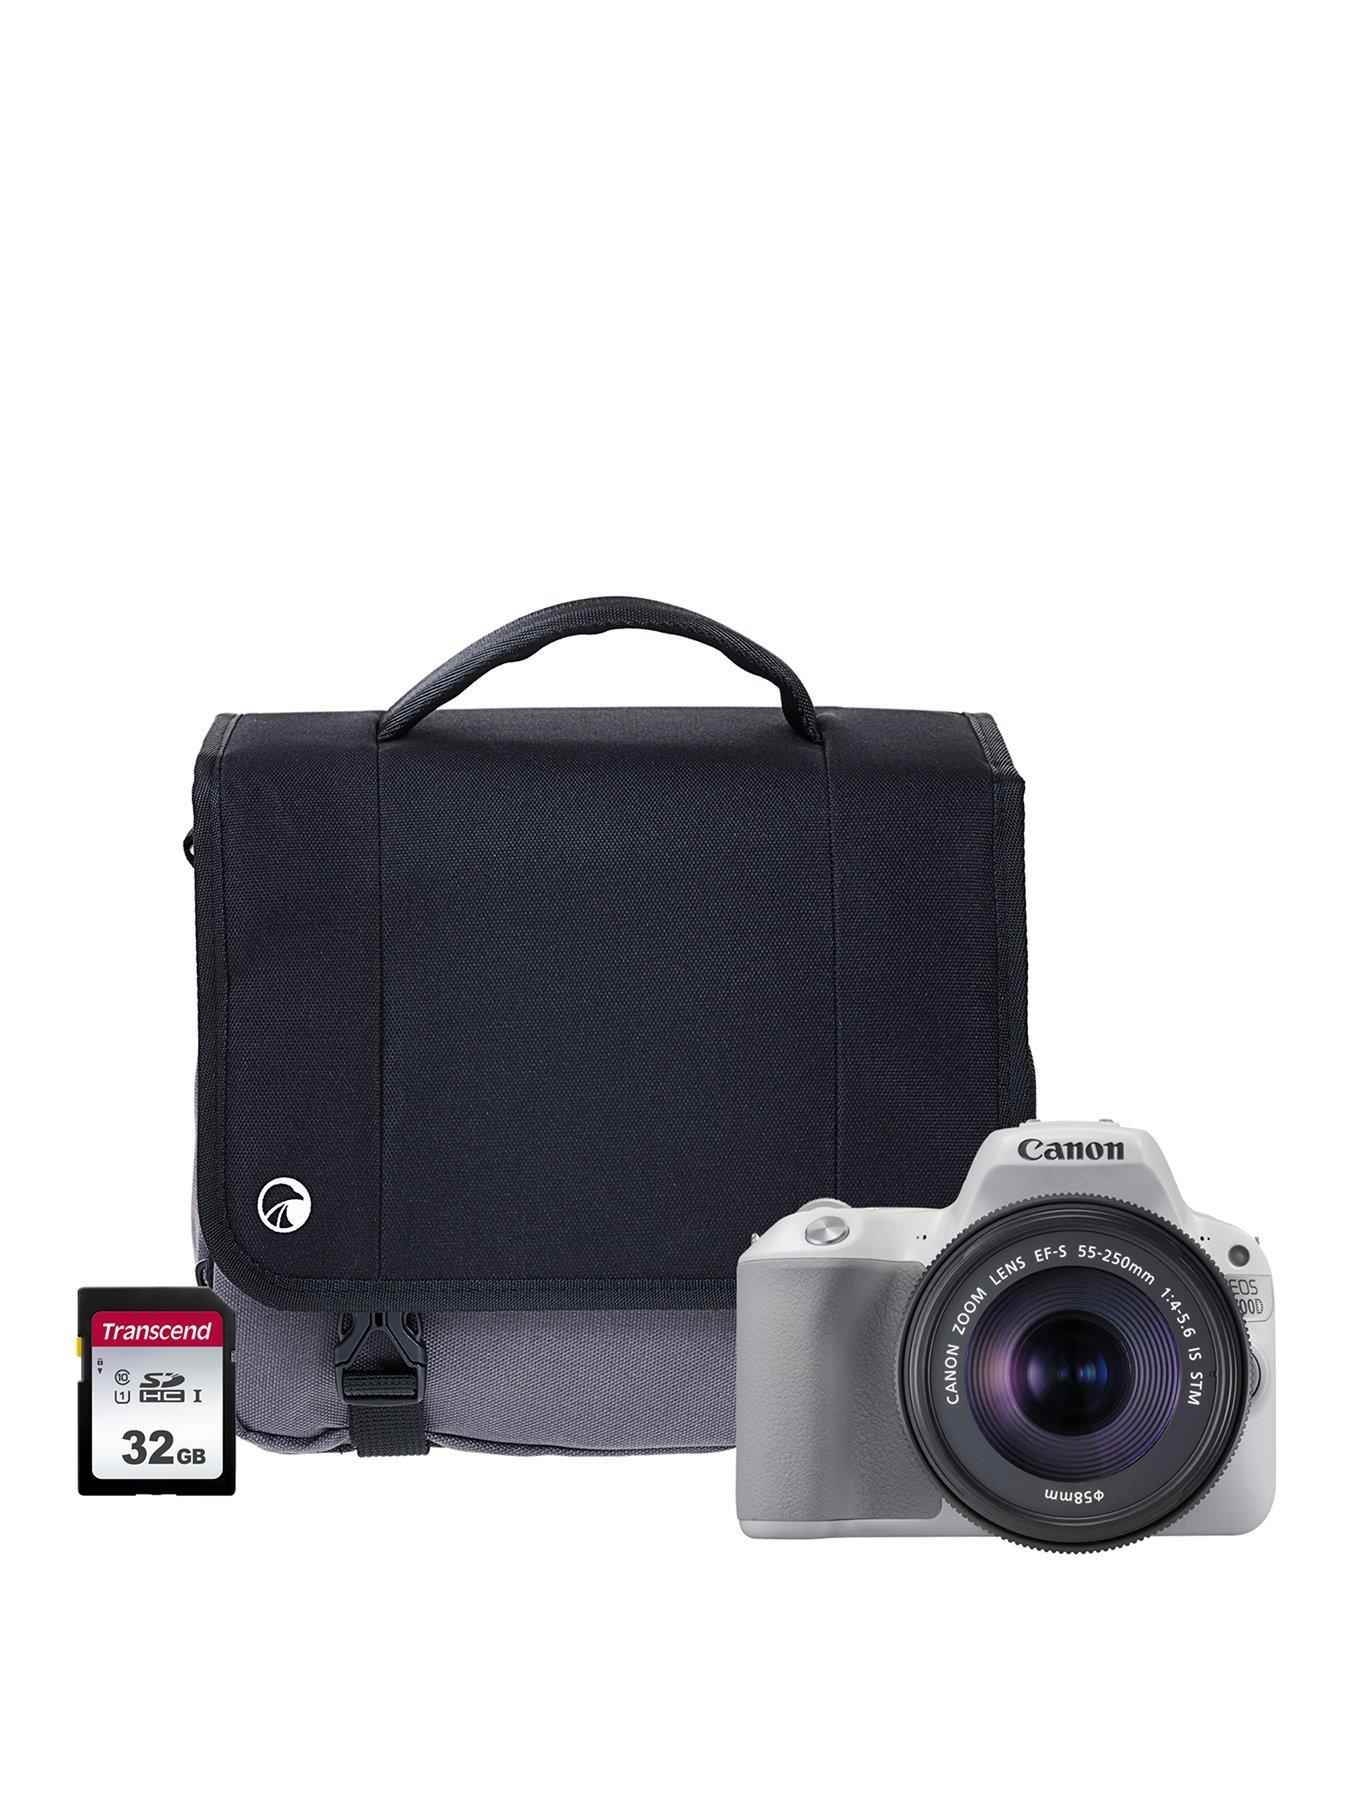 Canon Eos 200D White Slr Camera Kit Including 18-55Mm Is Stm Lens, 16Gb Sd Card And Case